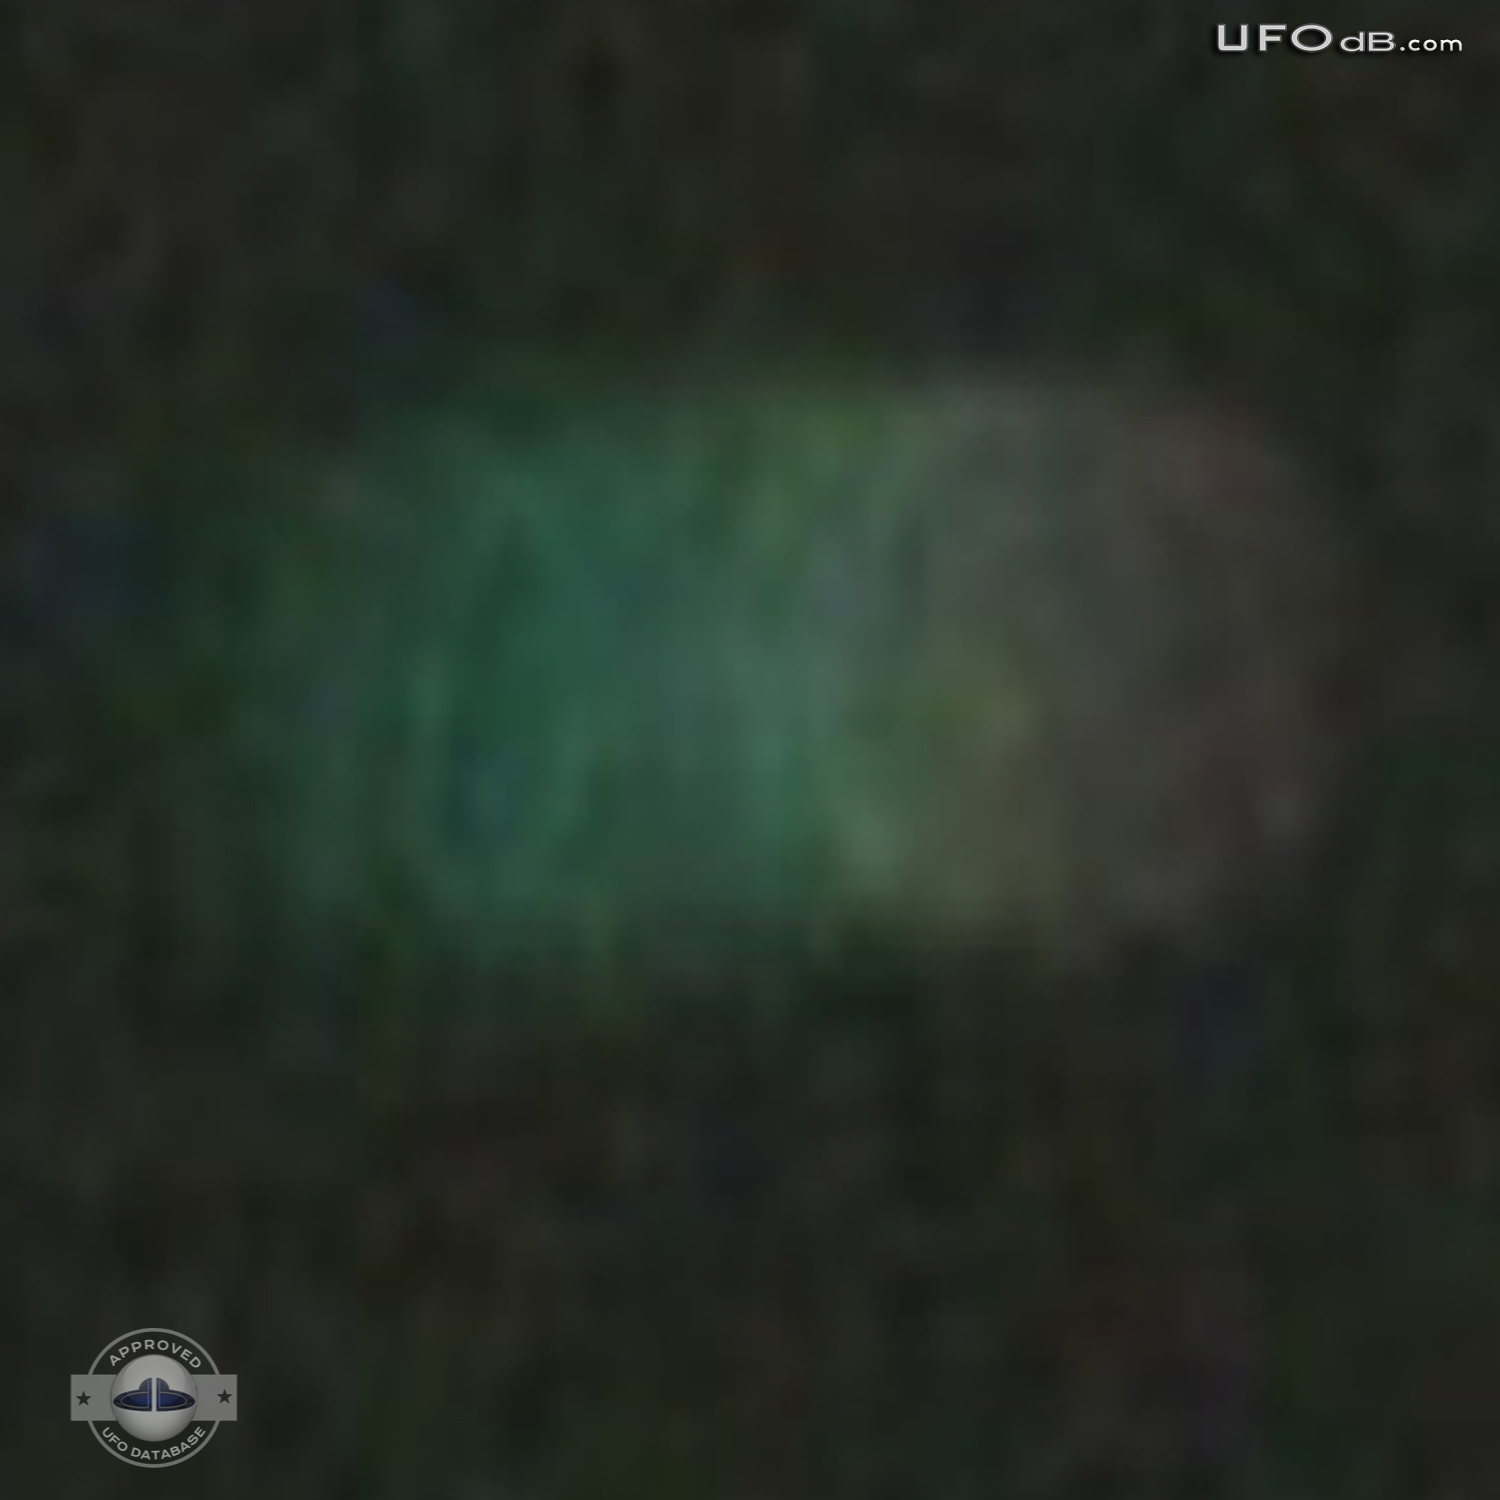 Taipei UFO picture shown on the local Television | Taiwan | May 7 2011 UFO Picture #287-5